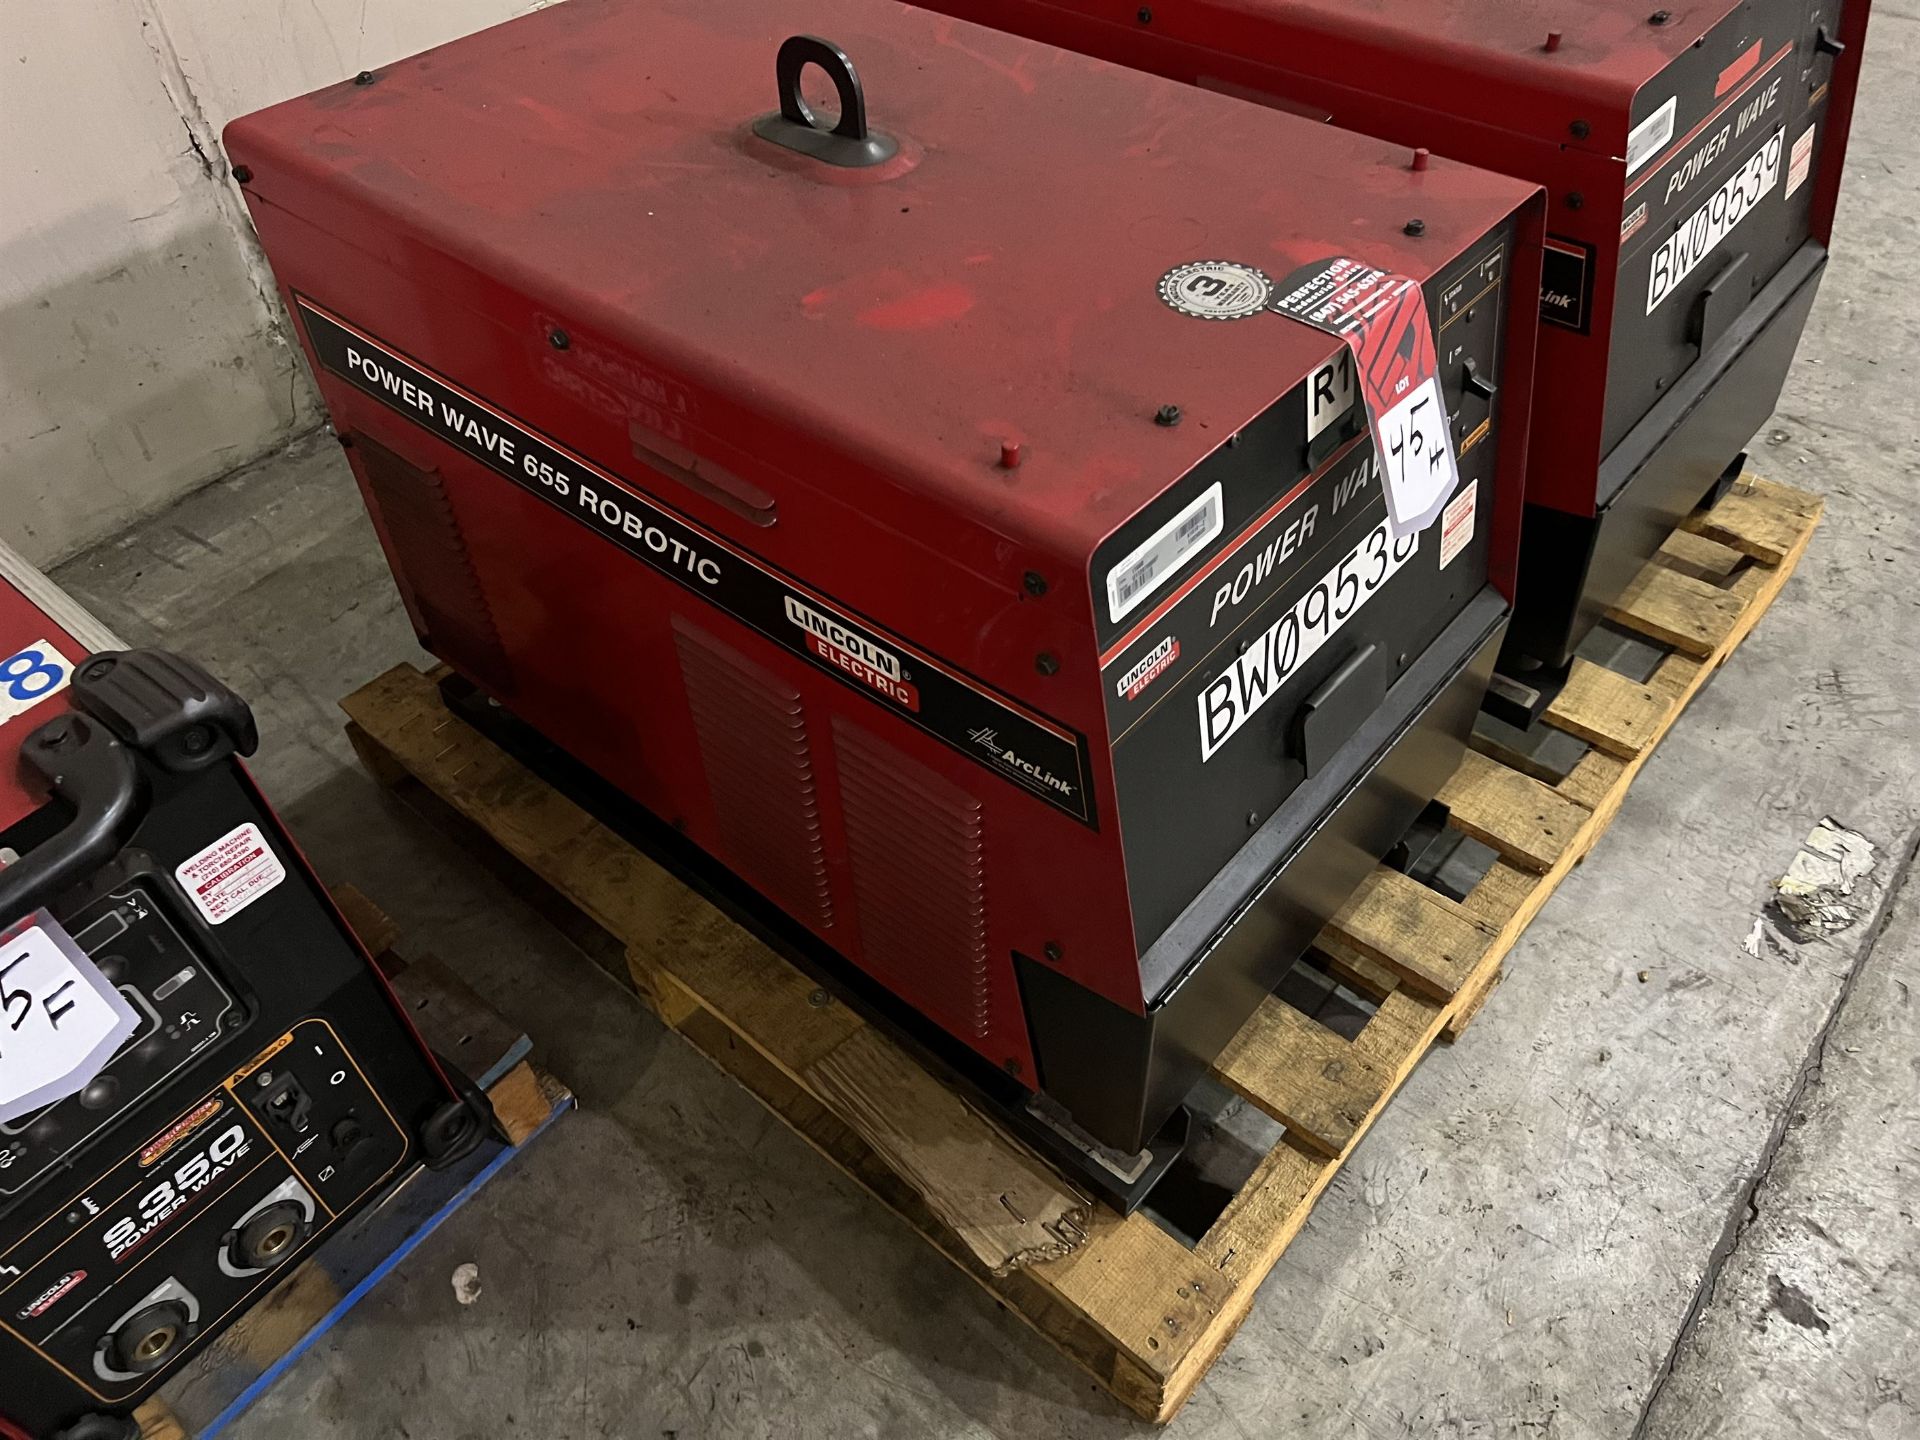 Lincoln Power Wave 655 Welder s/n U1120709597 (Located at 7300 Lone Tree Rd, Victoria, TX 77905) - Image 2 of 3